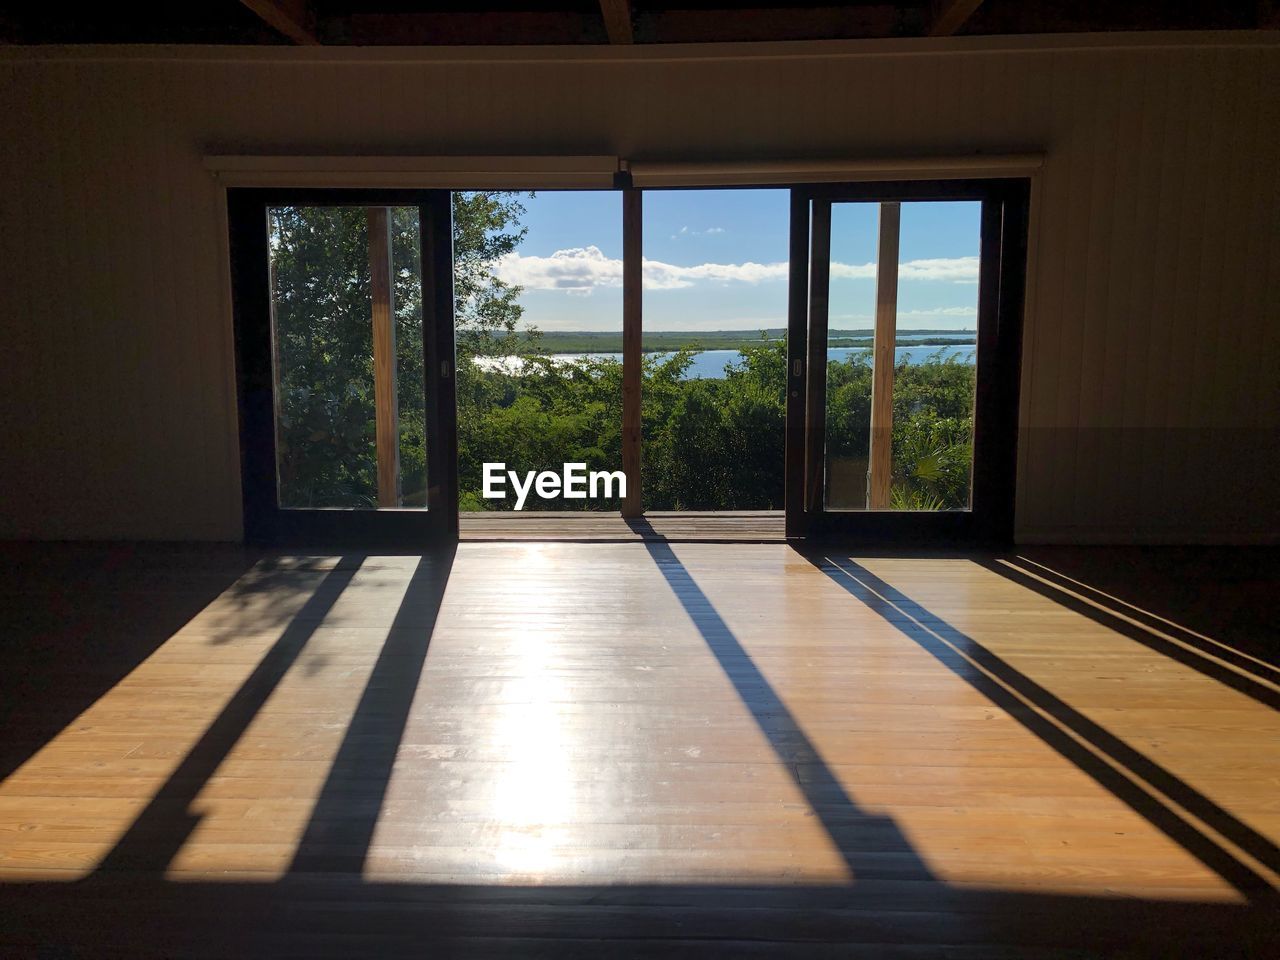 Sea and trees  seen through window of building with a sunlight shadow 